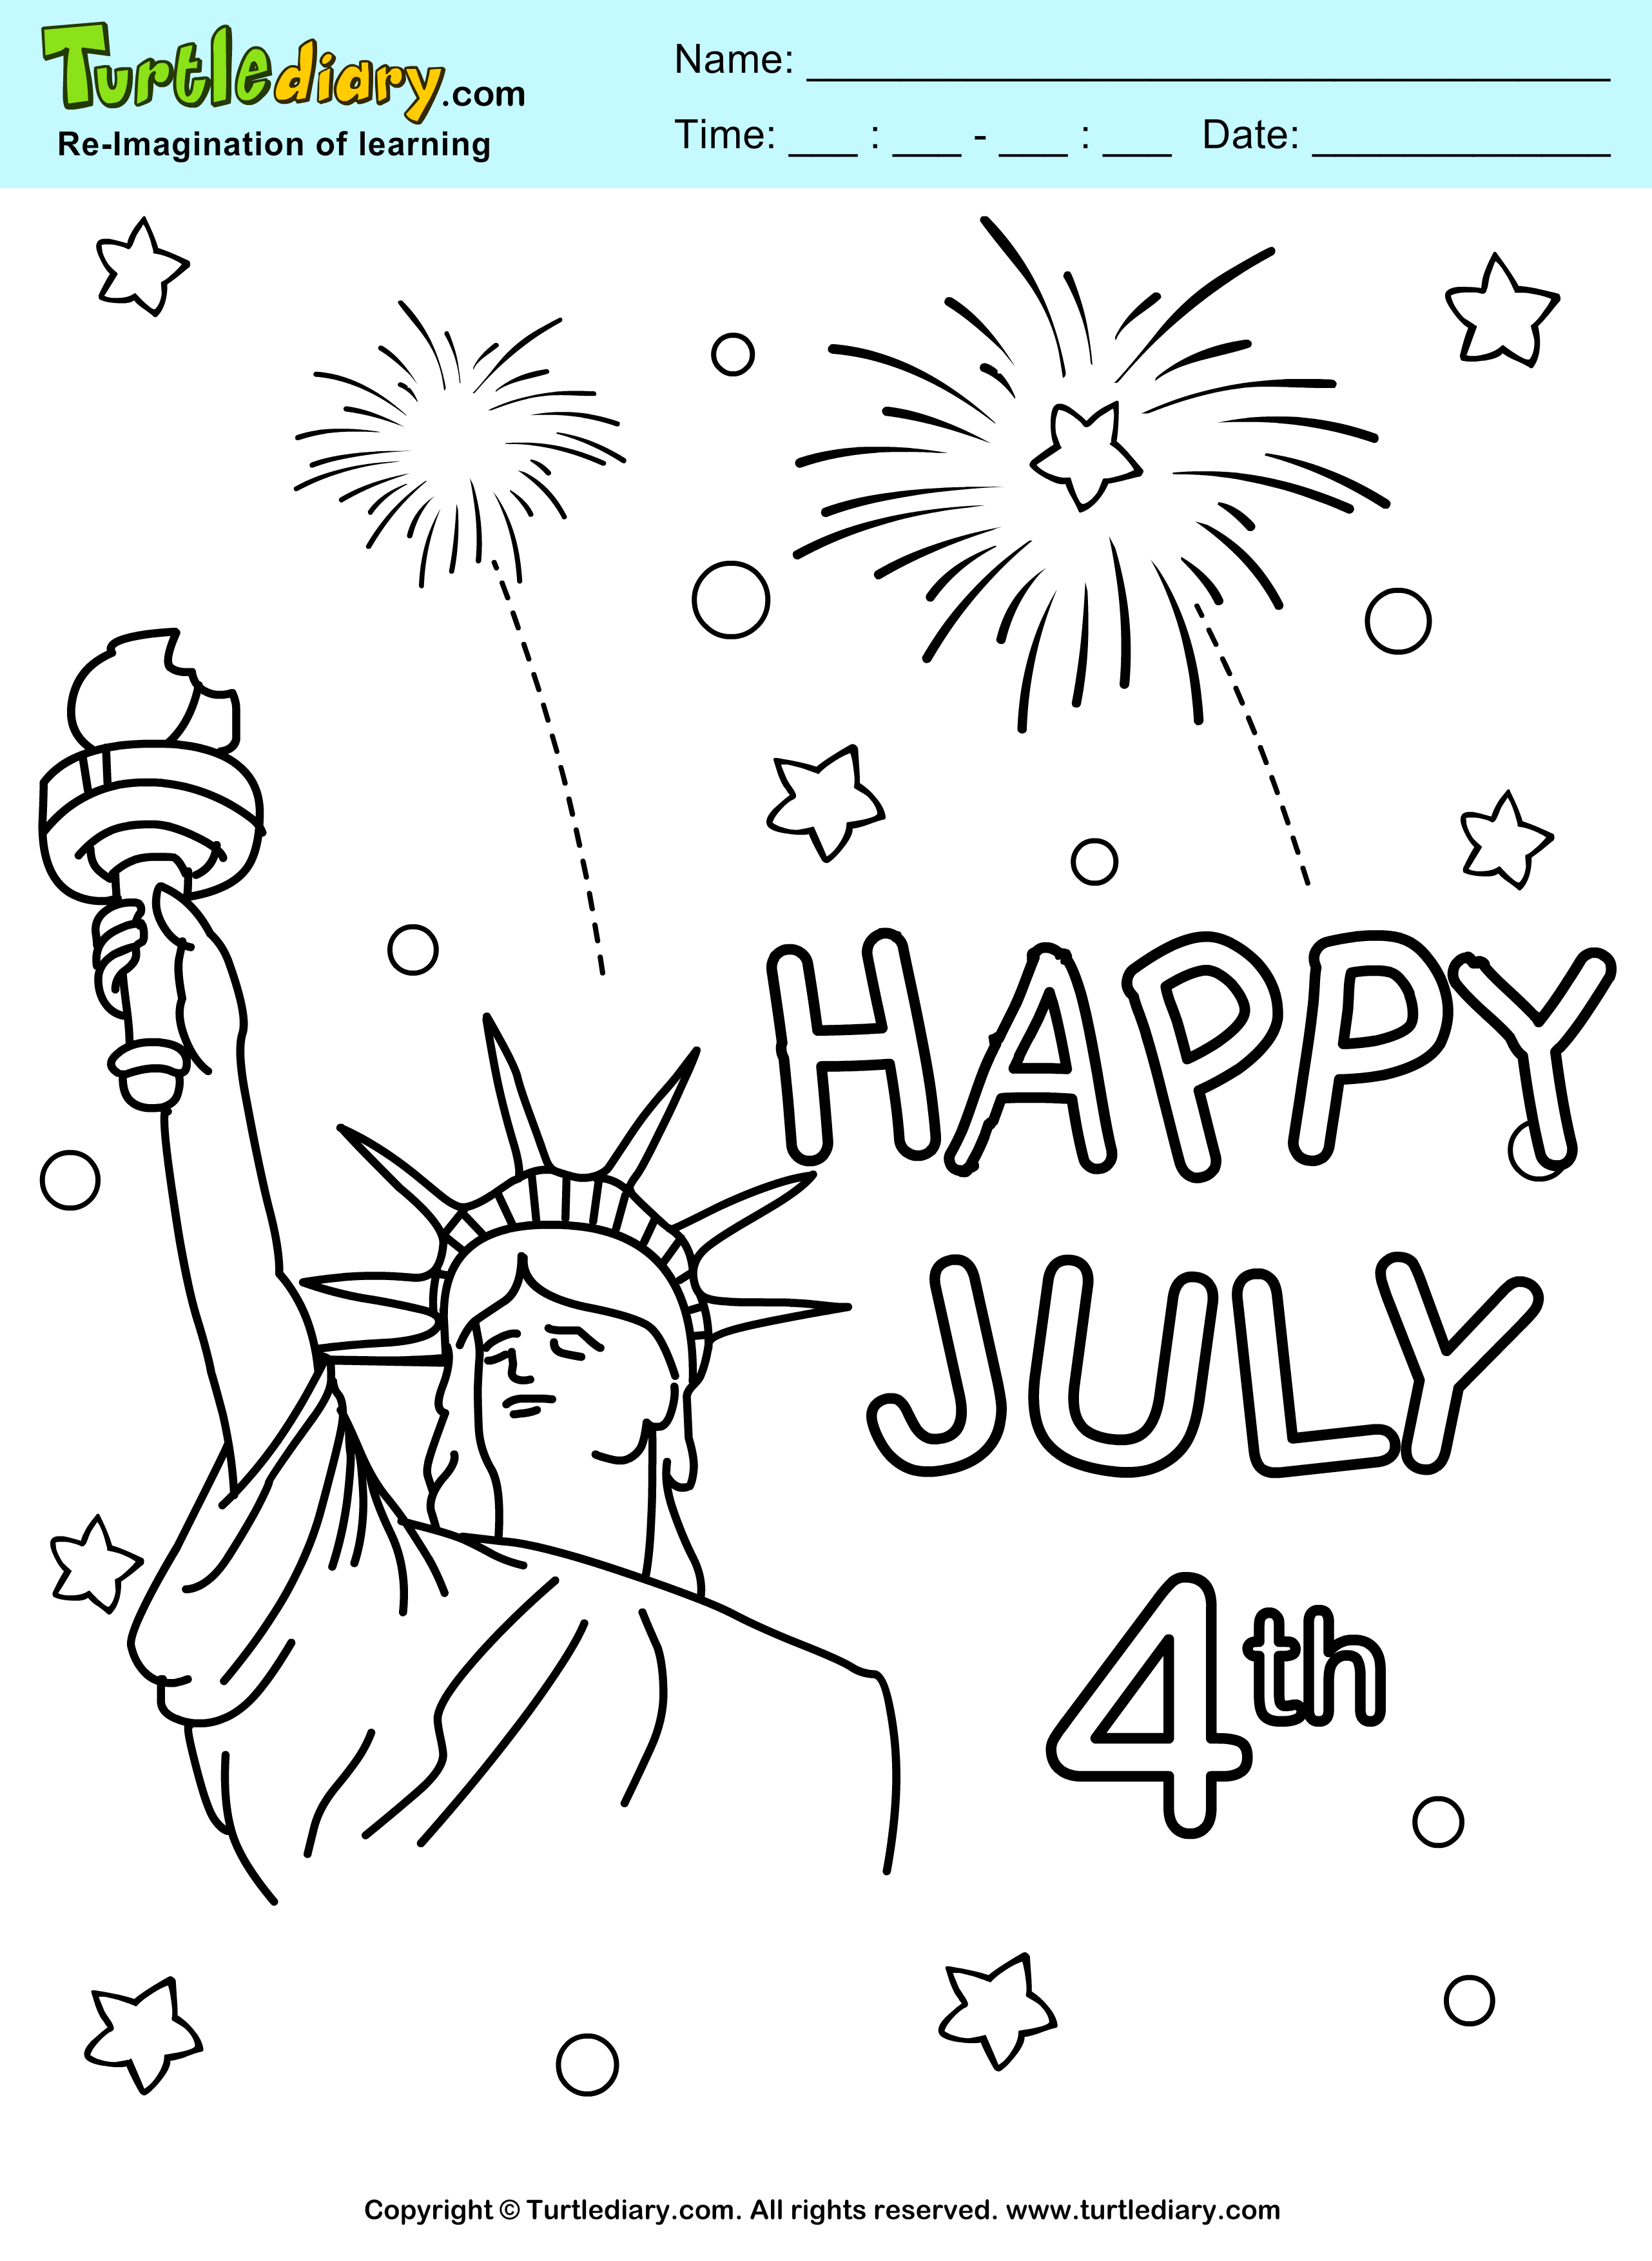 fireworks-4th-of-july-printable-coloring-sheet-turtle-diary